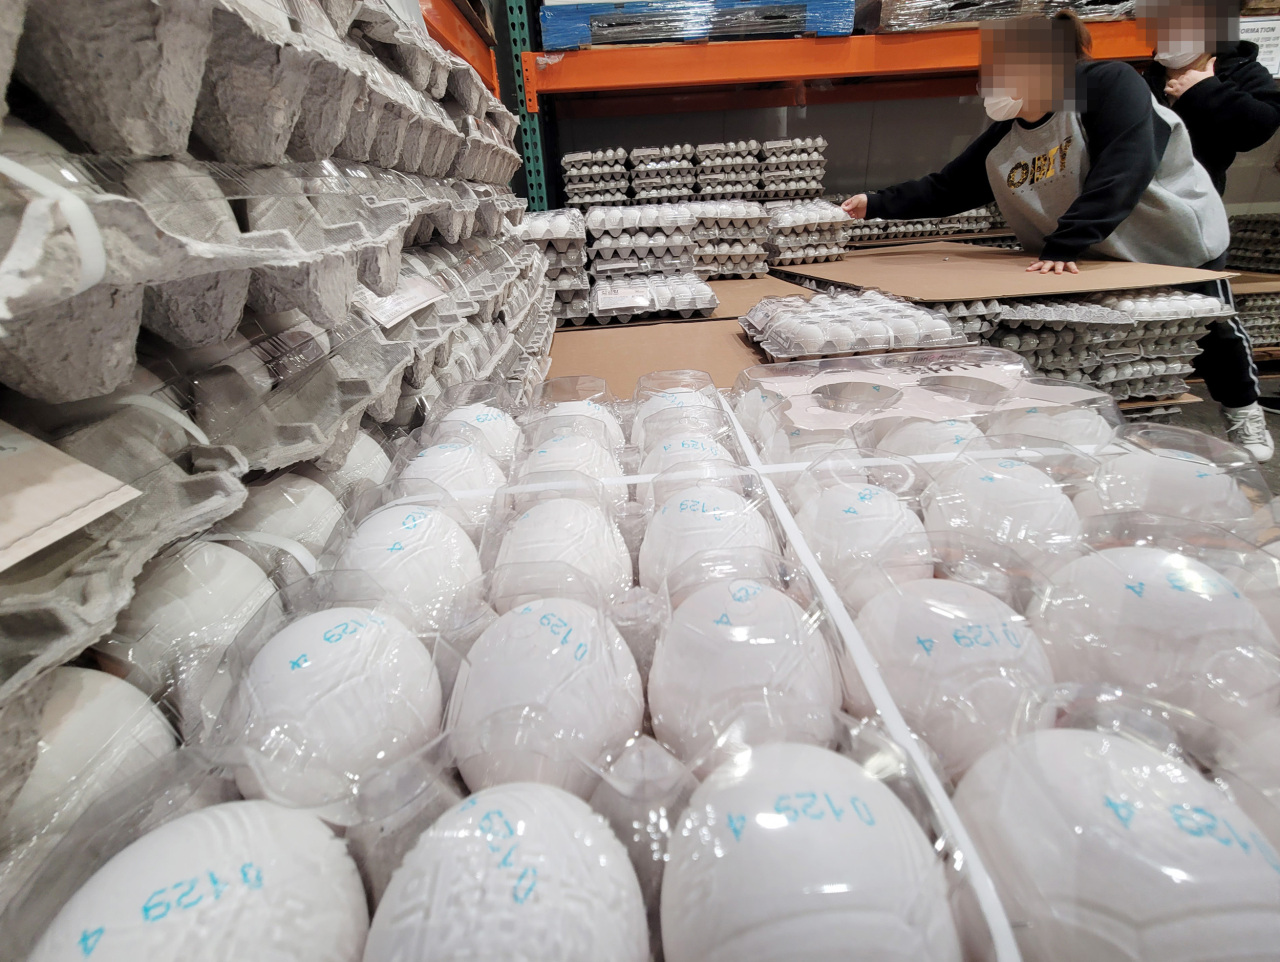 Eggs imported from the United States are displayed at a supermarket in Seoul on Feb. 7, 2021. (Yonhap)